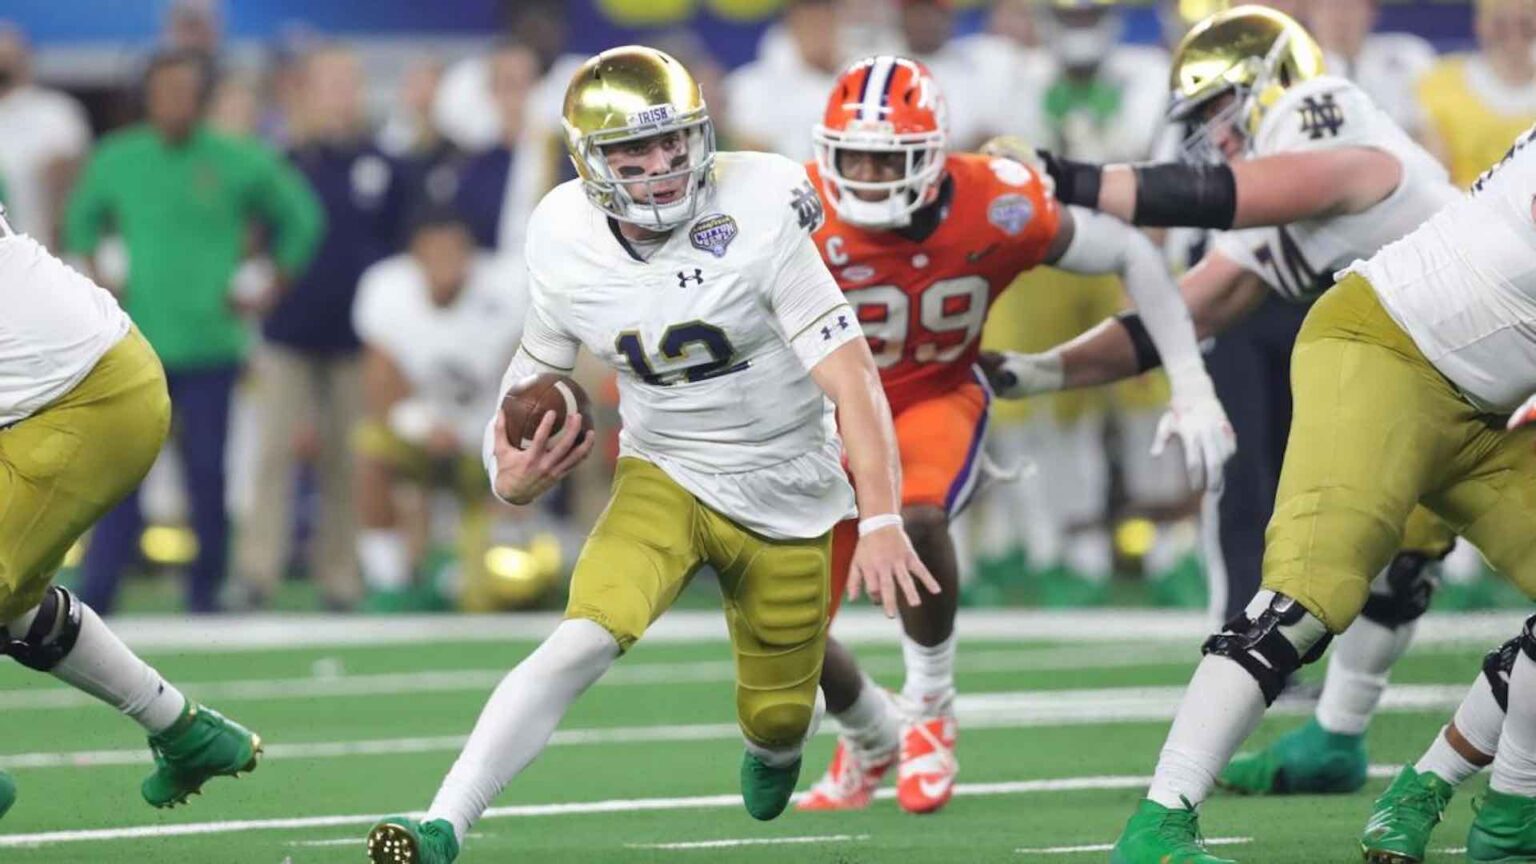 The Notre Dame vs Clemson game is easily the biggest Pac-12 game in week 10. Read more here on how to watch the game.